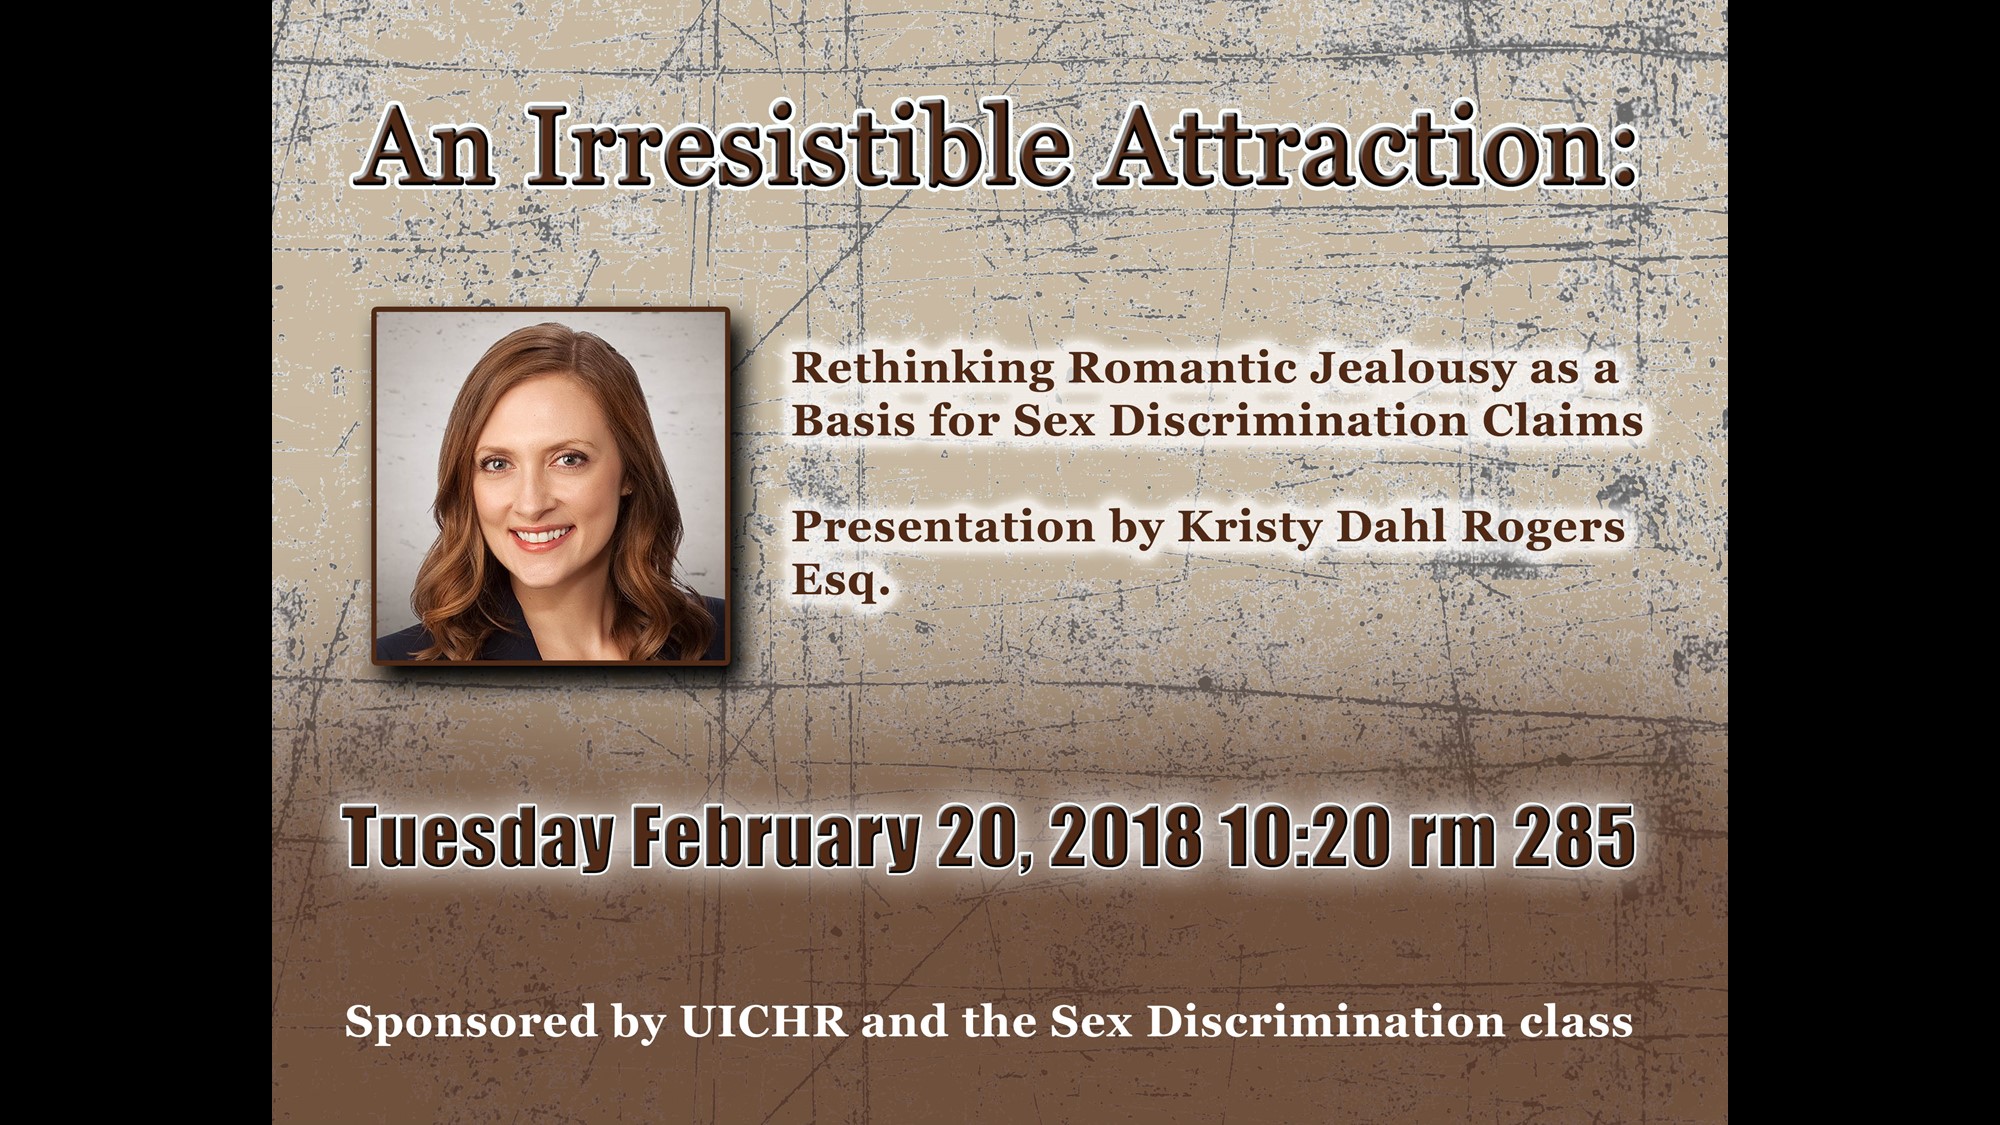 An Irresistible Attraction by Kristy Dahl Rogers